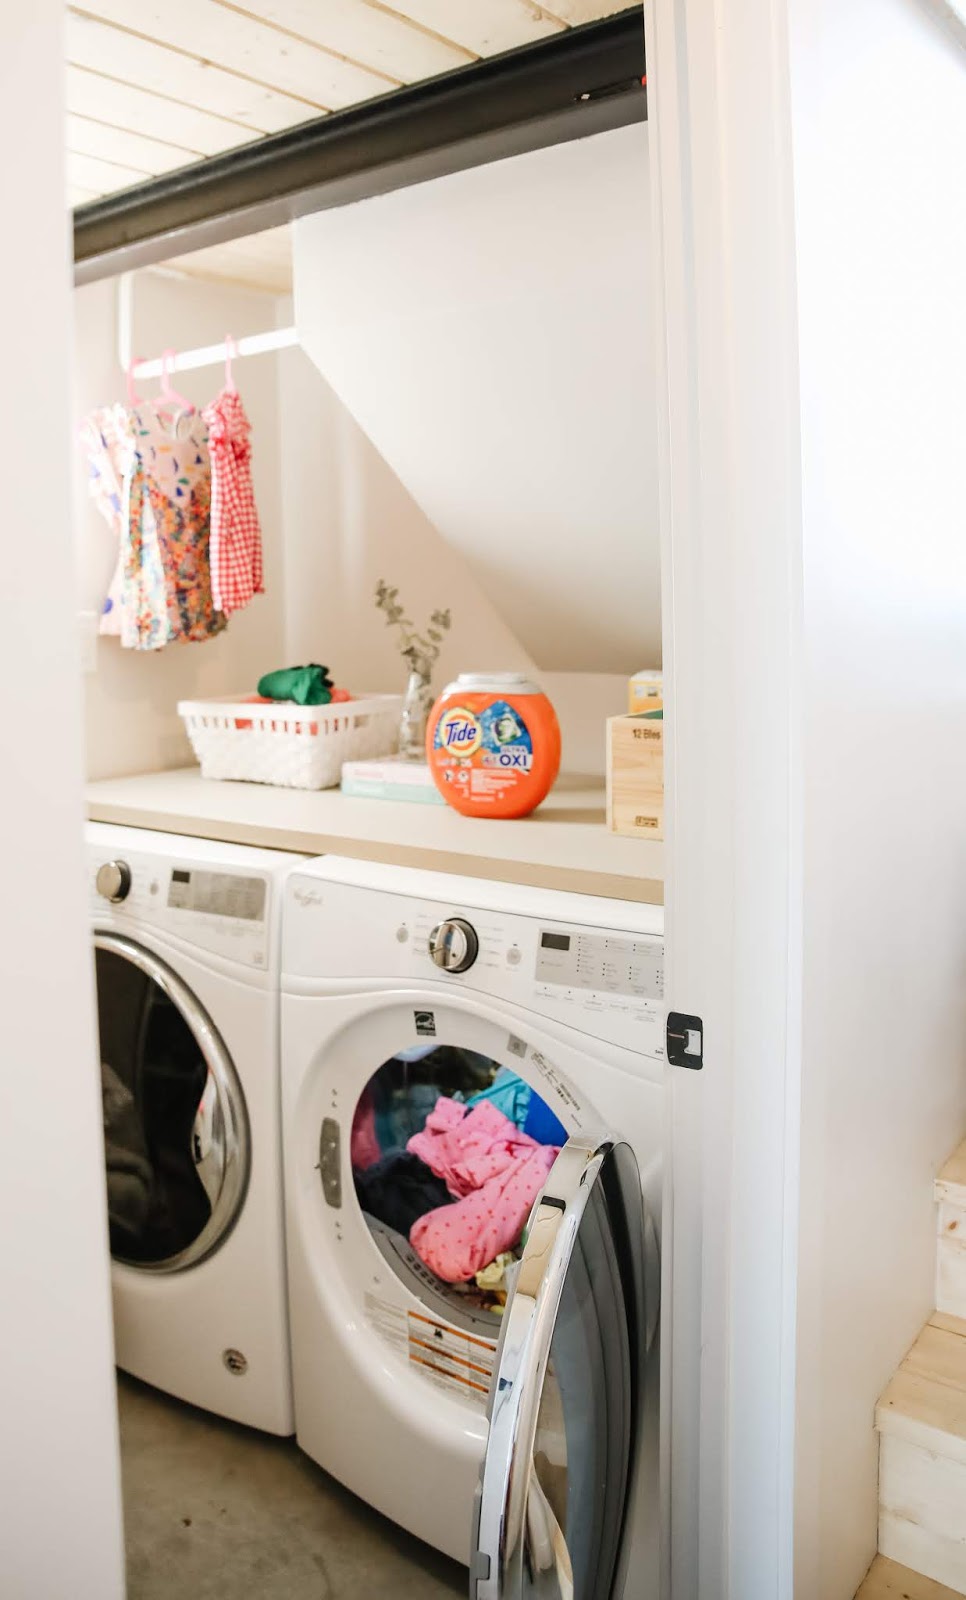 My Top Tips for Your Next Laundry Time: From our family’s wardrobe to ...